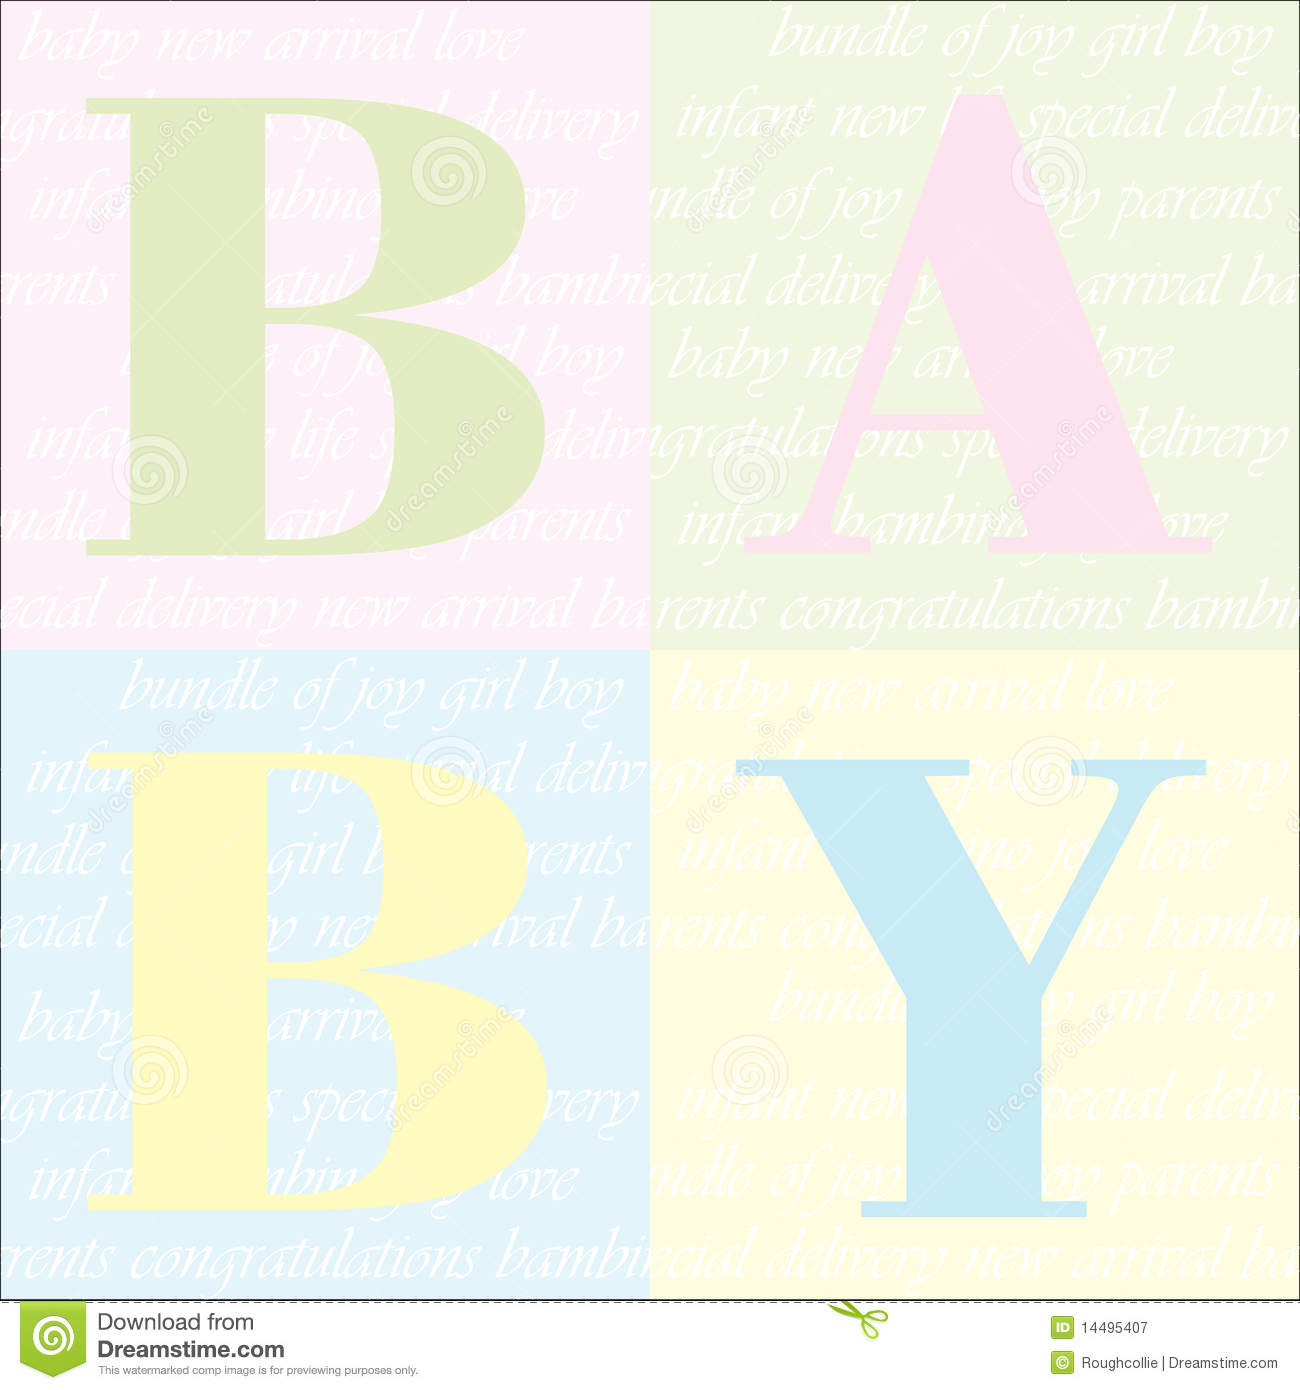 Baby Blocks Spelling The Word Baby Ideal For New Baby Announcement